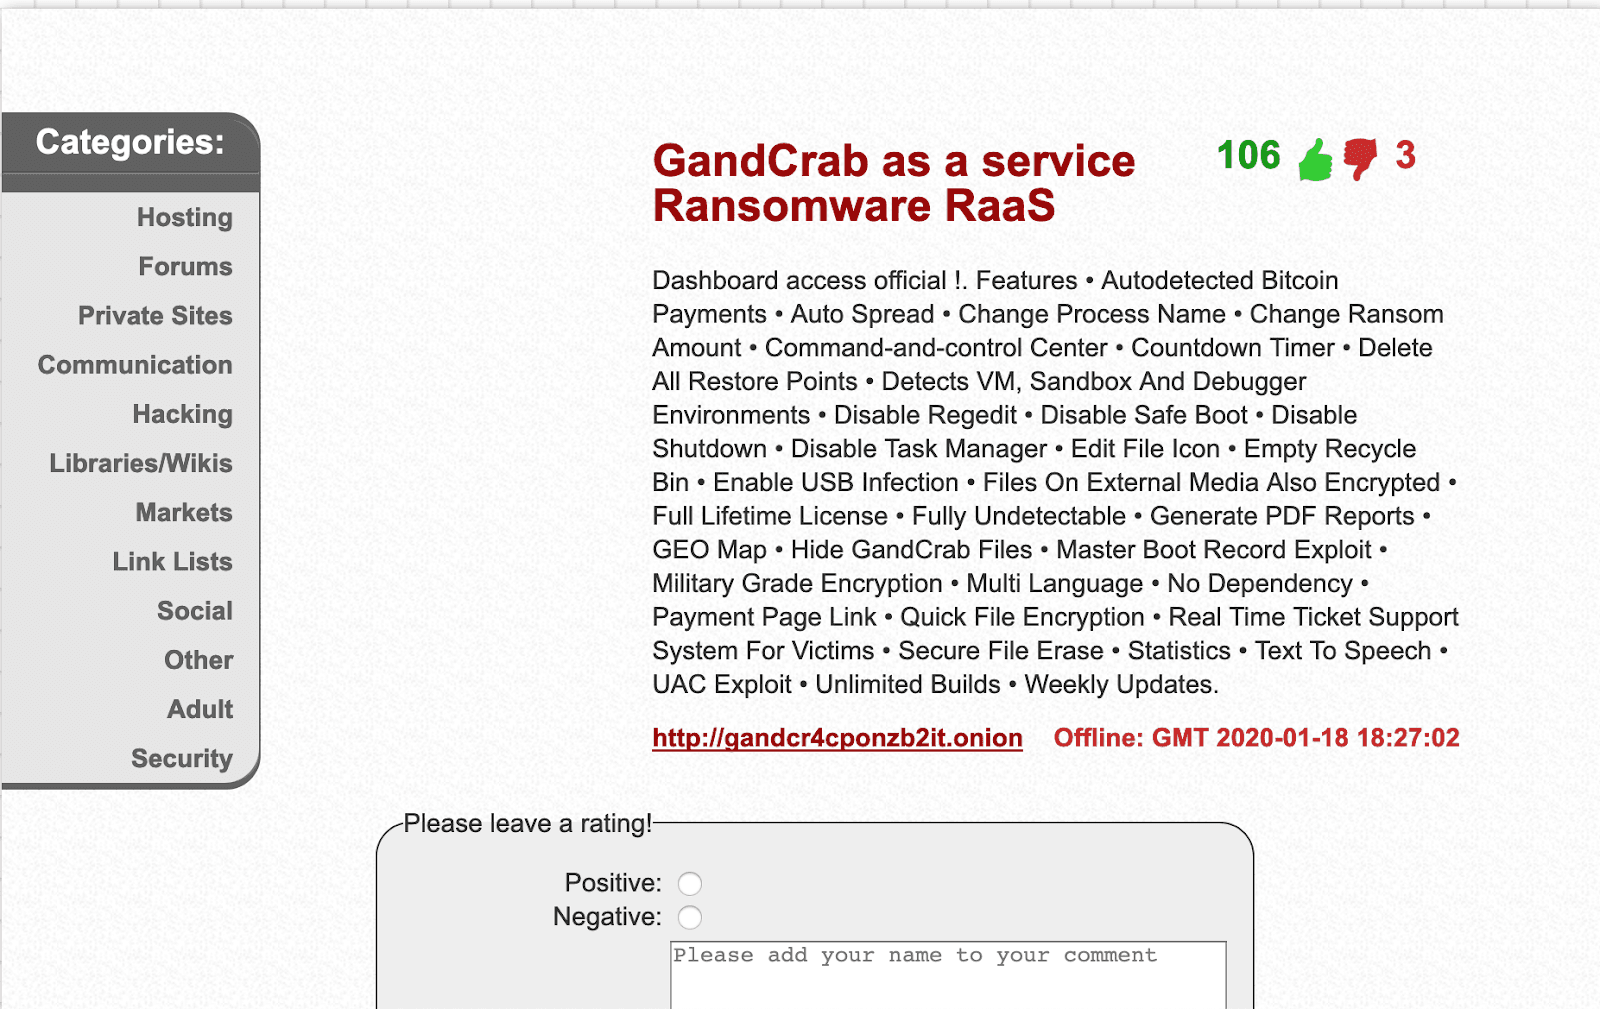 ransomware-trends-2020-1-1.png